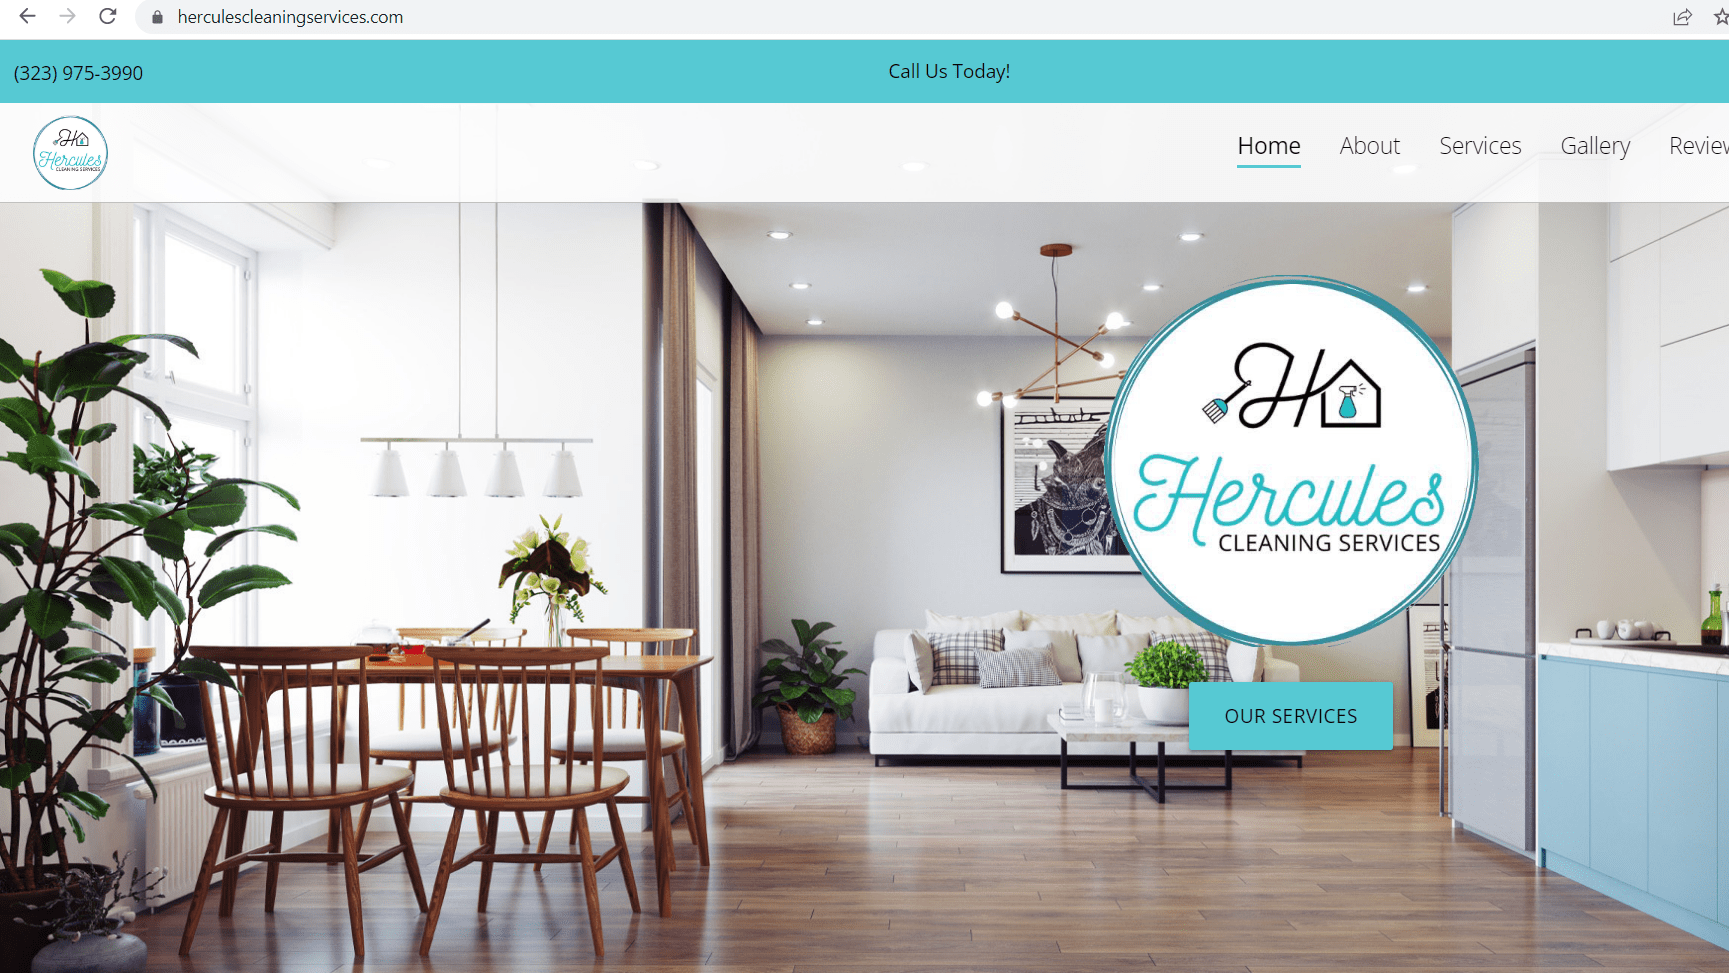 Hercules Cleaning Services (Los Angeles, CA)